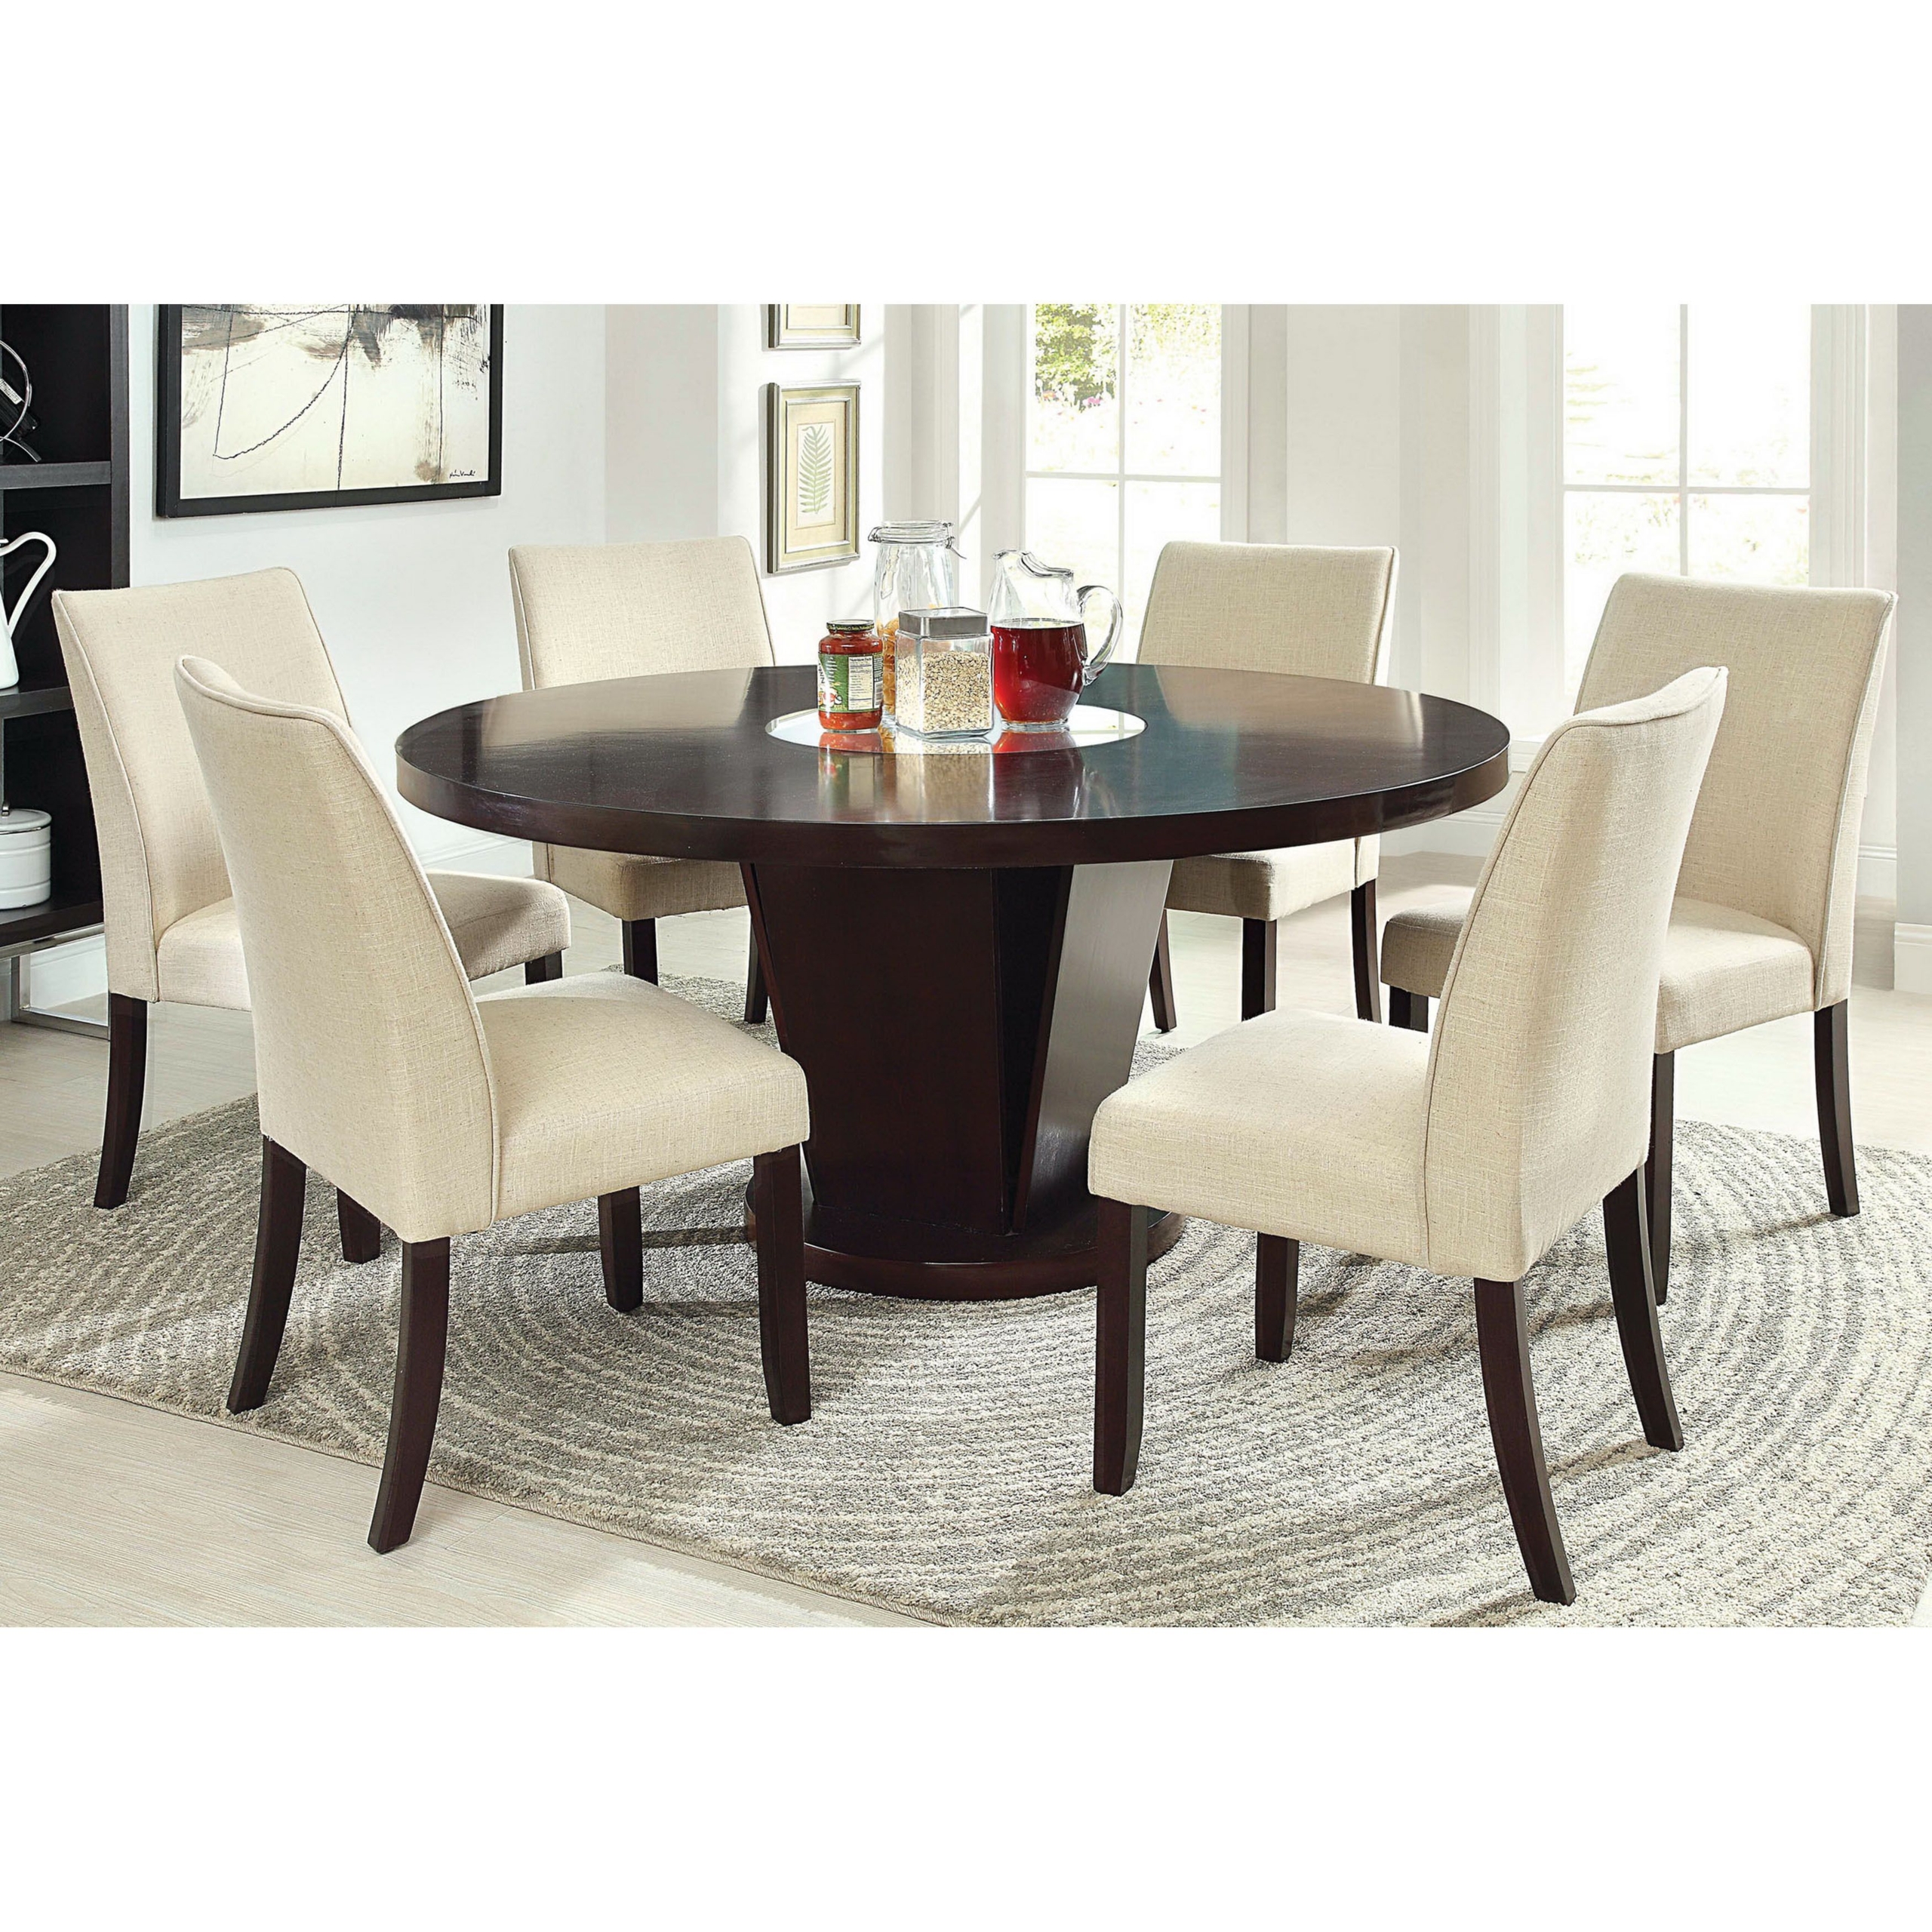 Furniture of America Telstars Round Dining Table with Lazy Susan, Espresso